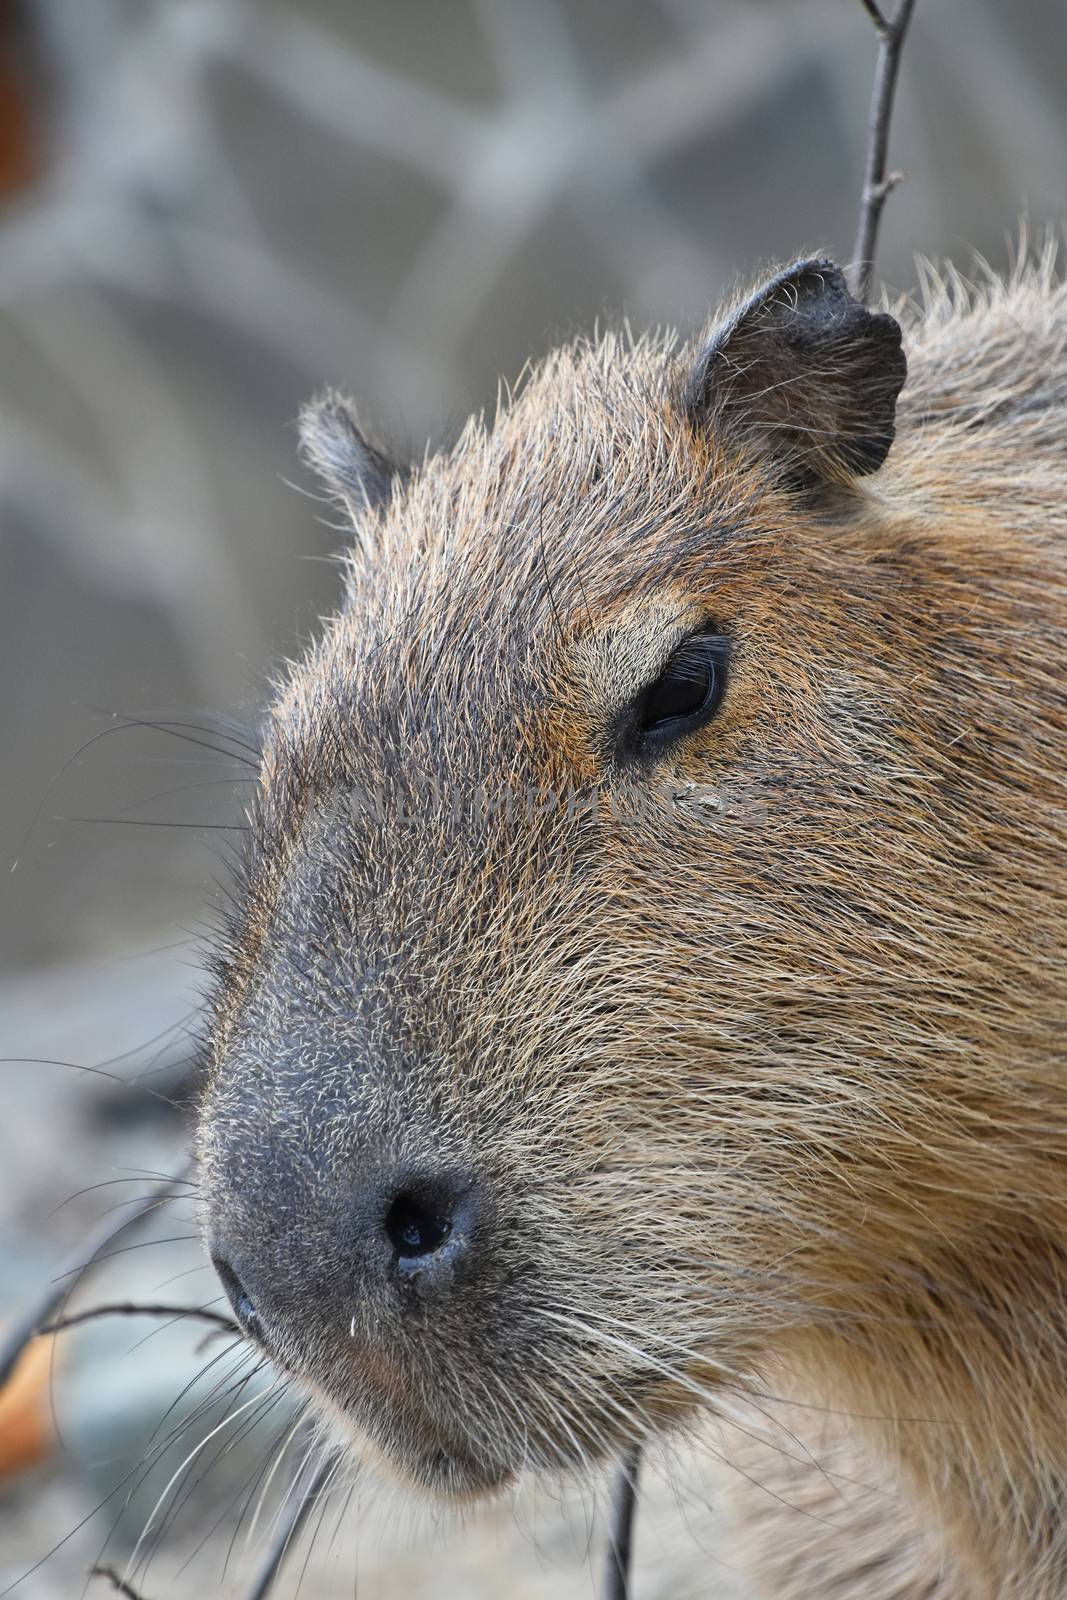 Close up portrait of capybara (Hydrochoerus hydrochaeris), the largest rodent in the world